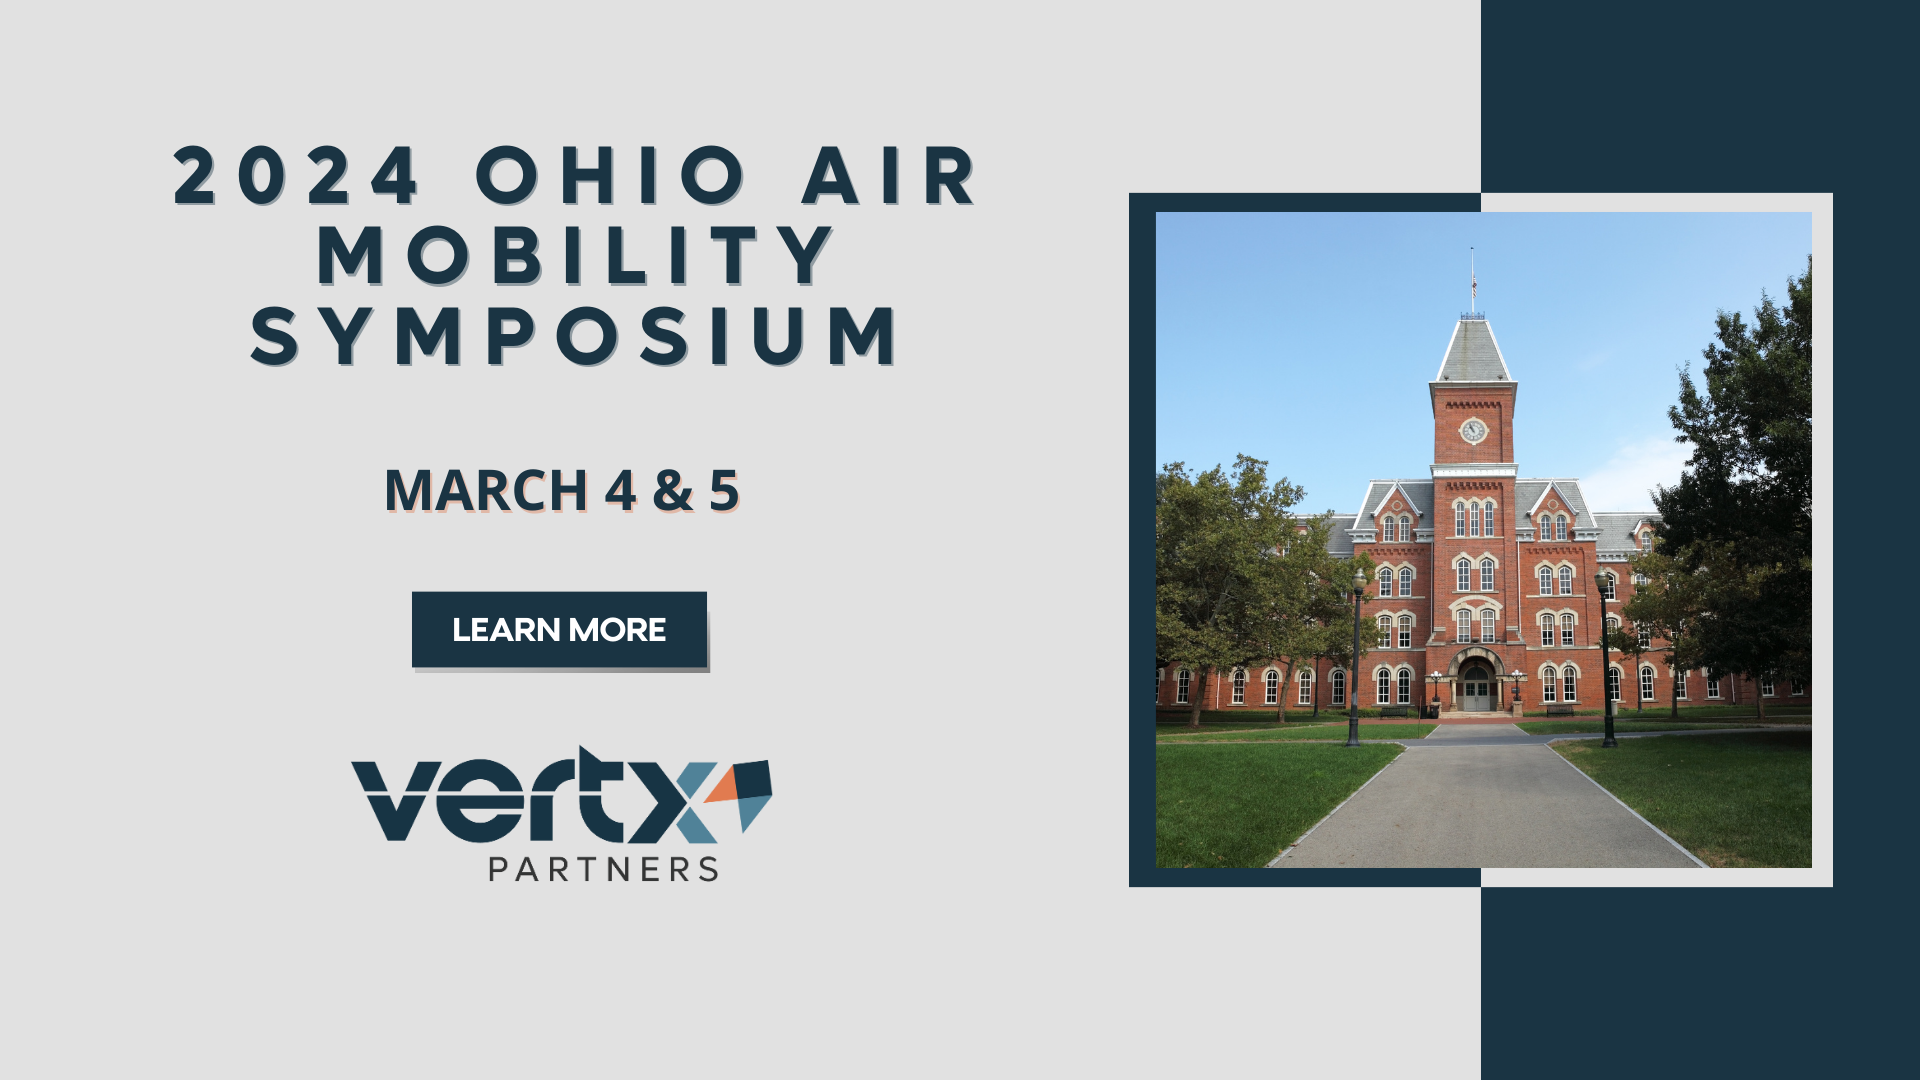 This graphic has the title "2024 Ohio Air Mobility Symposium" with the dates march 4 and 5 under it a photo of an Ohio State building with a blue sky and grass in the front of the building to the right of the title and date.